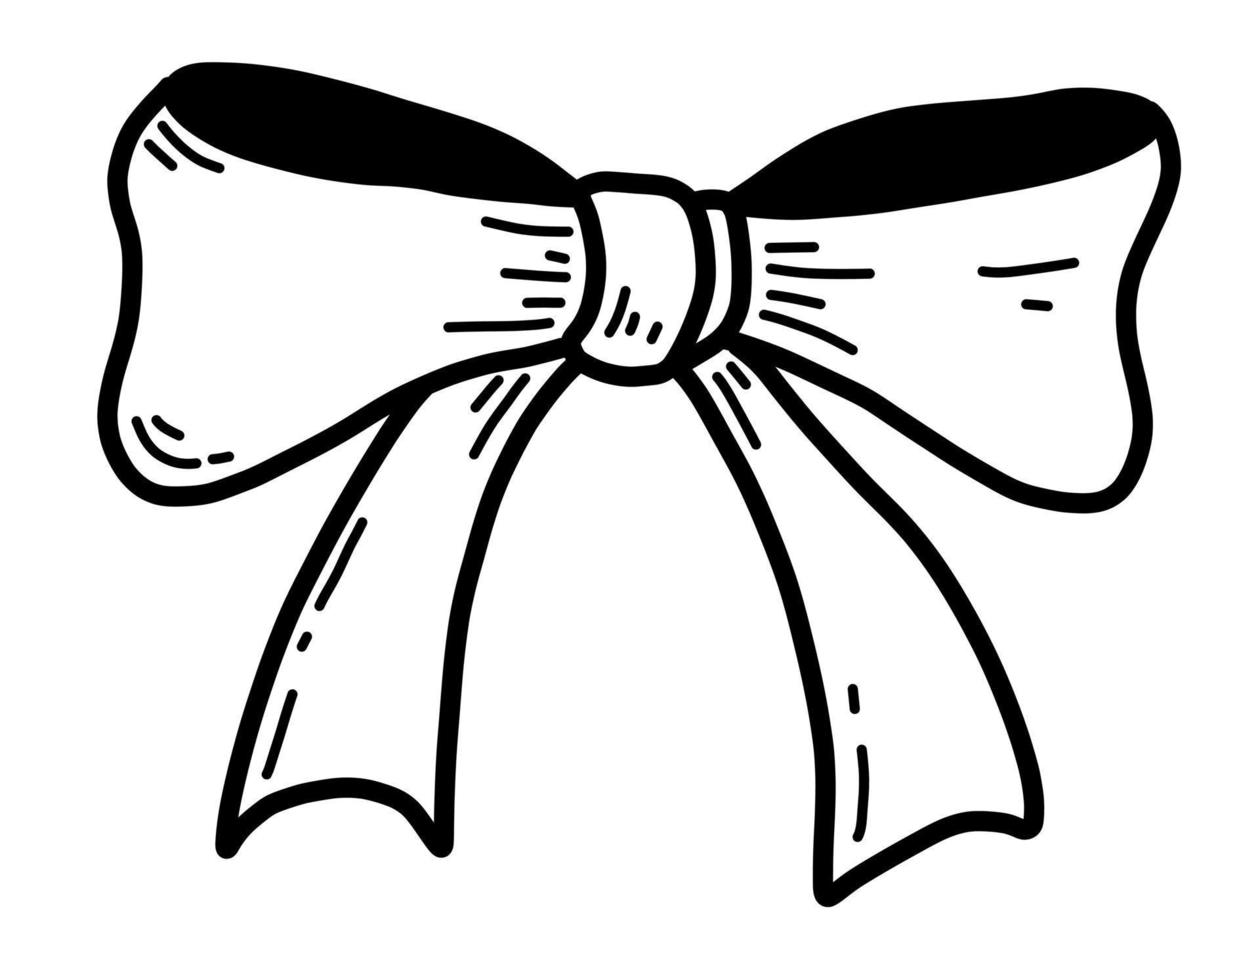 Ribbon with Bow for Gift. Vector black Tie for Present. Hand drawn illustration in sketch style